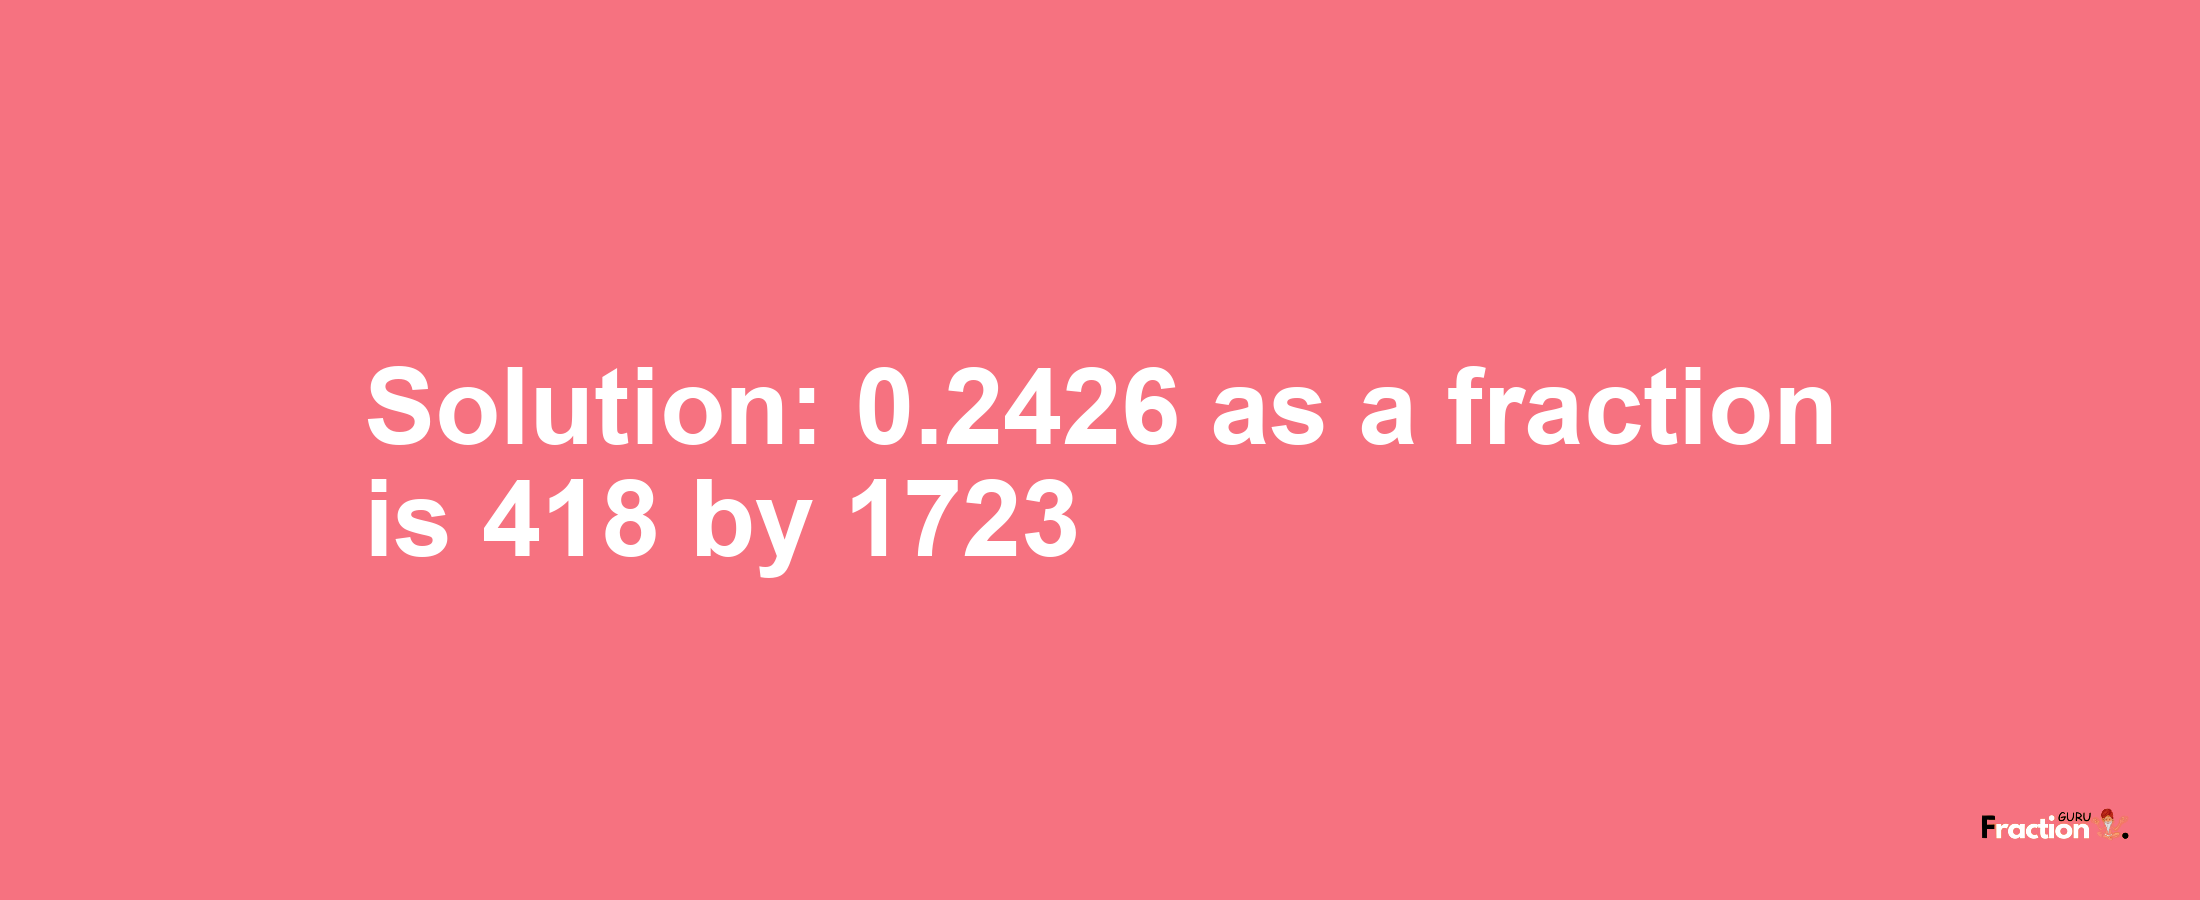 Solution:0.2426 as a fraction is 418/1723